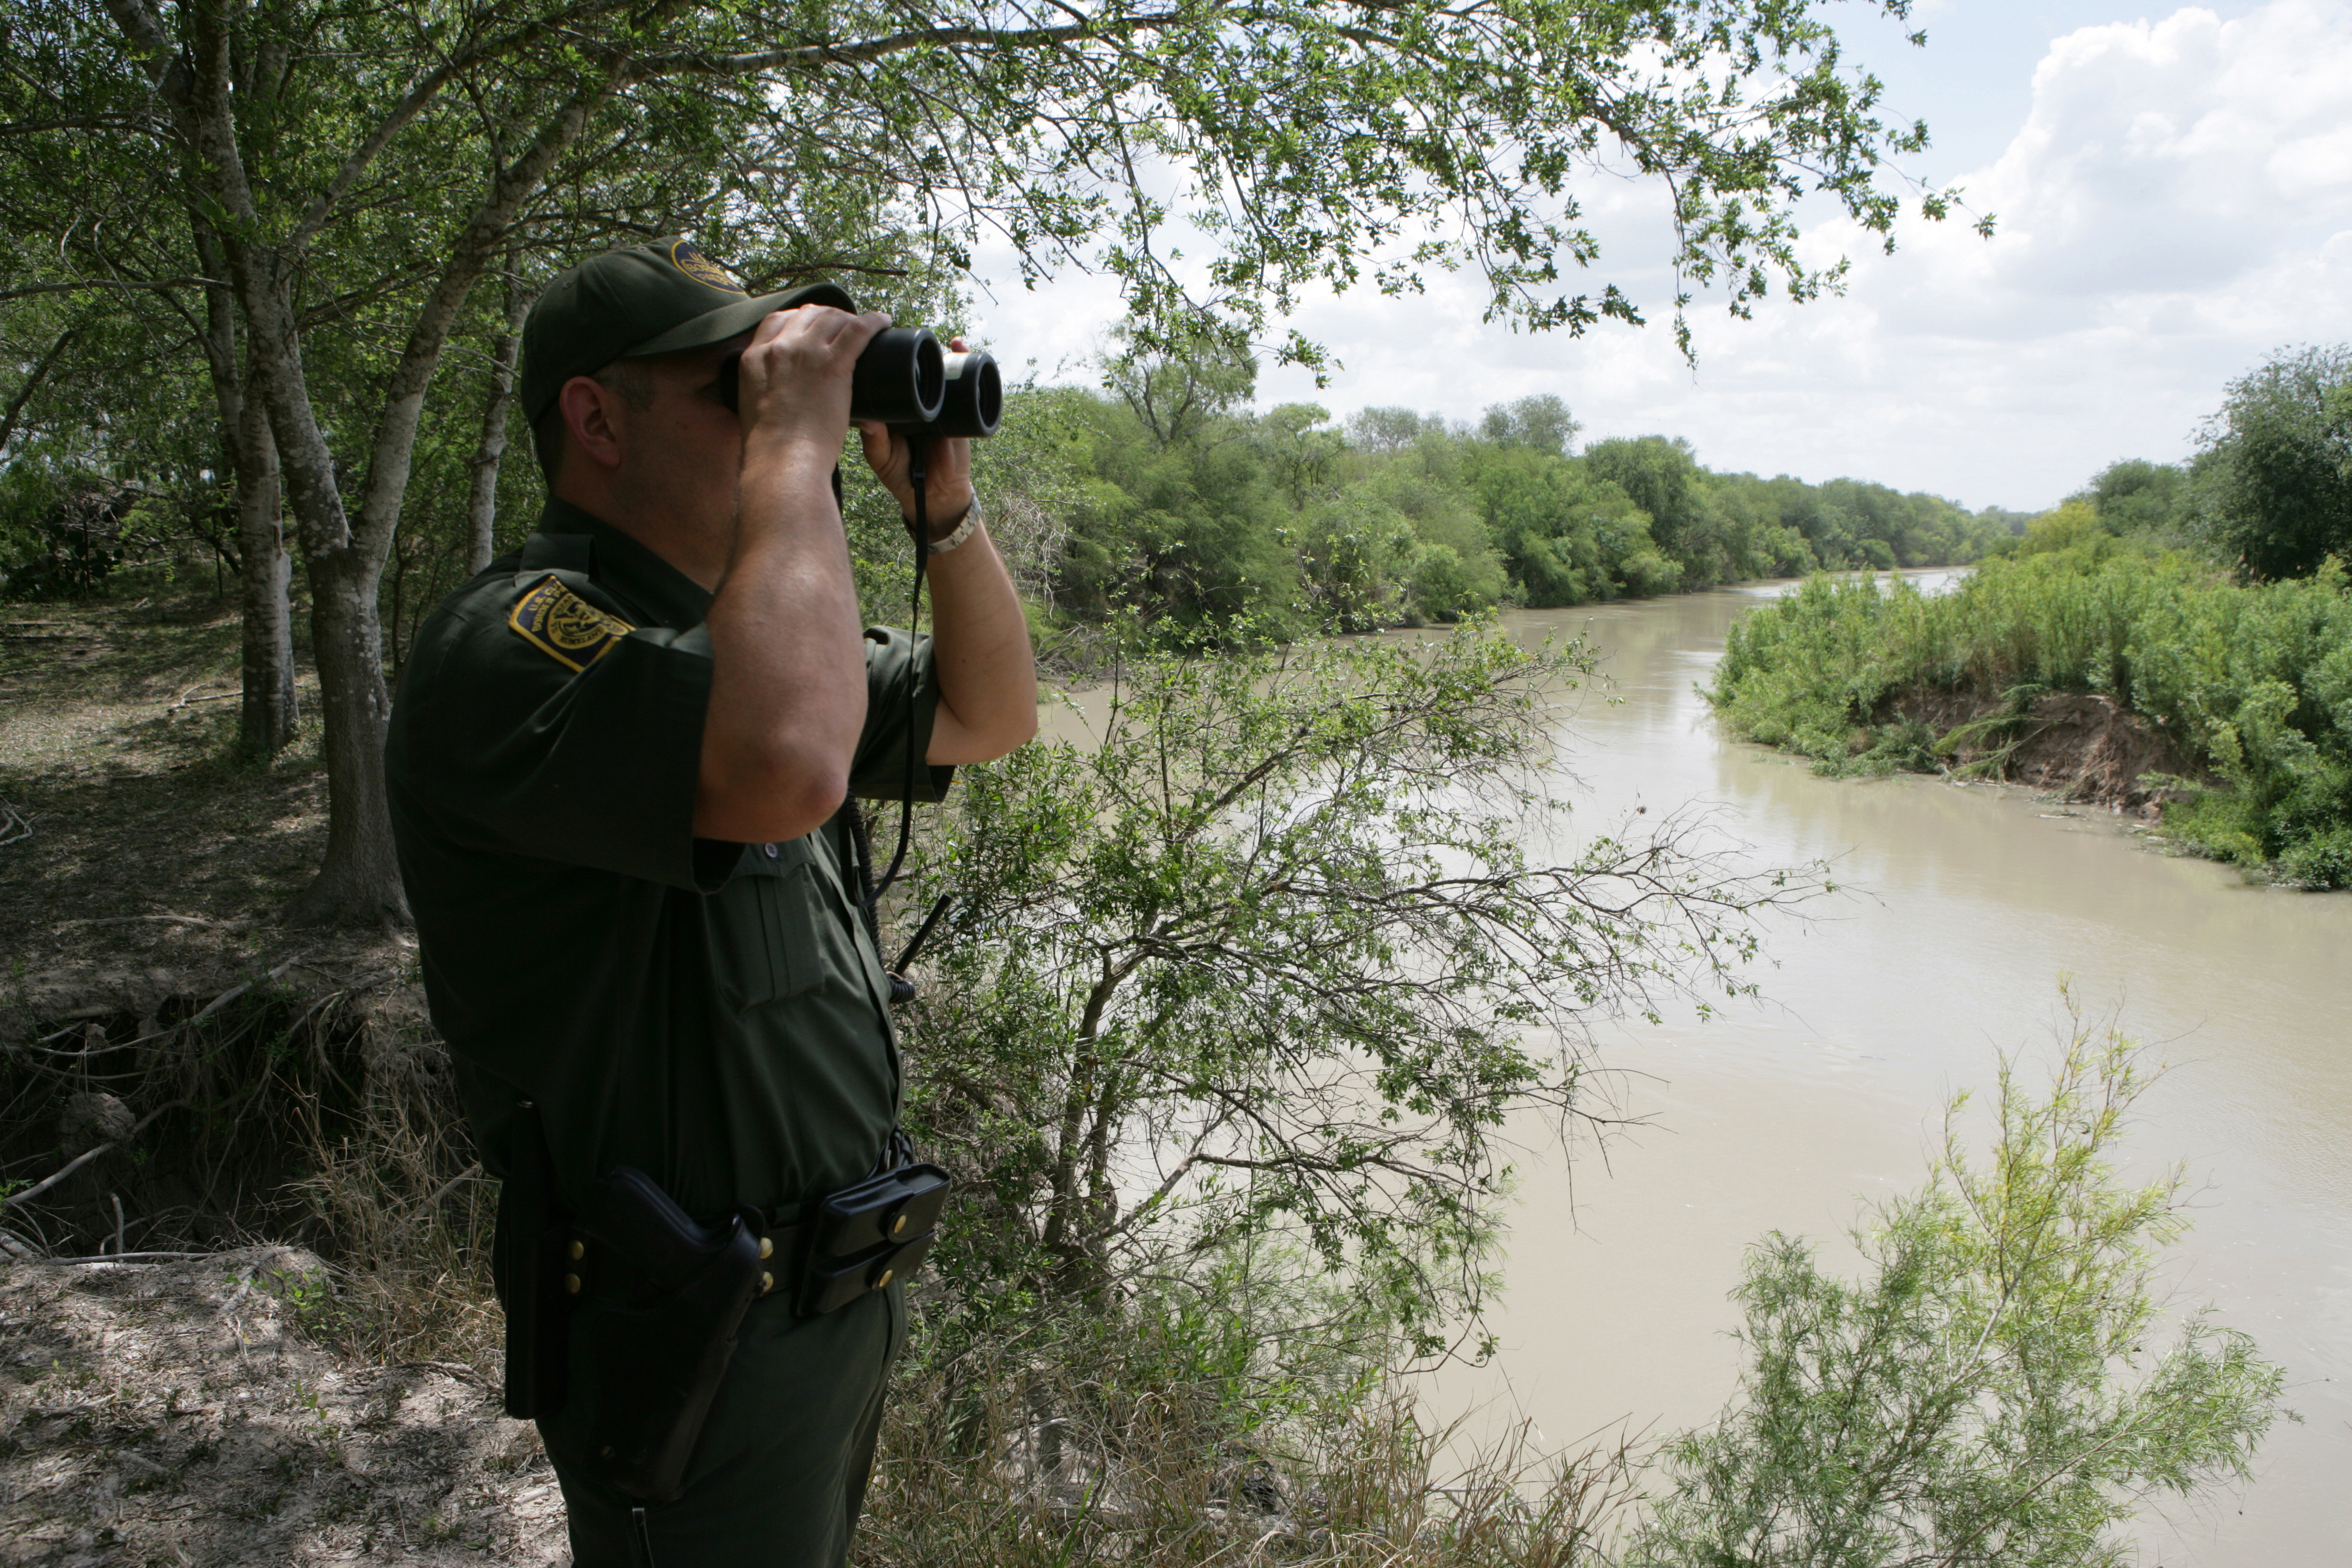 U.S. Border Patrol agent scans the area into Mexico with binoculars looking for illegal immigrants potentially staging to enter the United States.